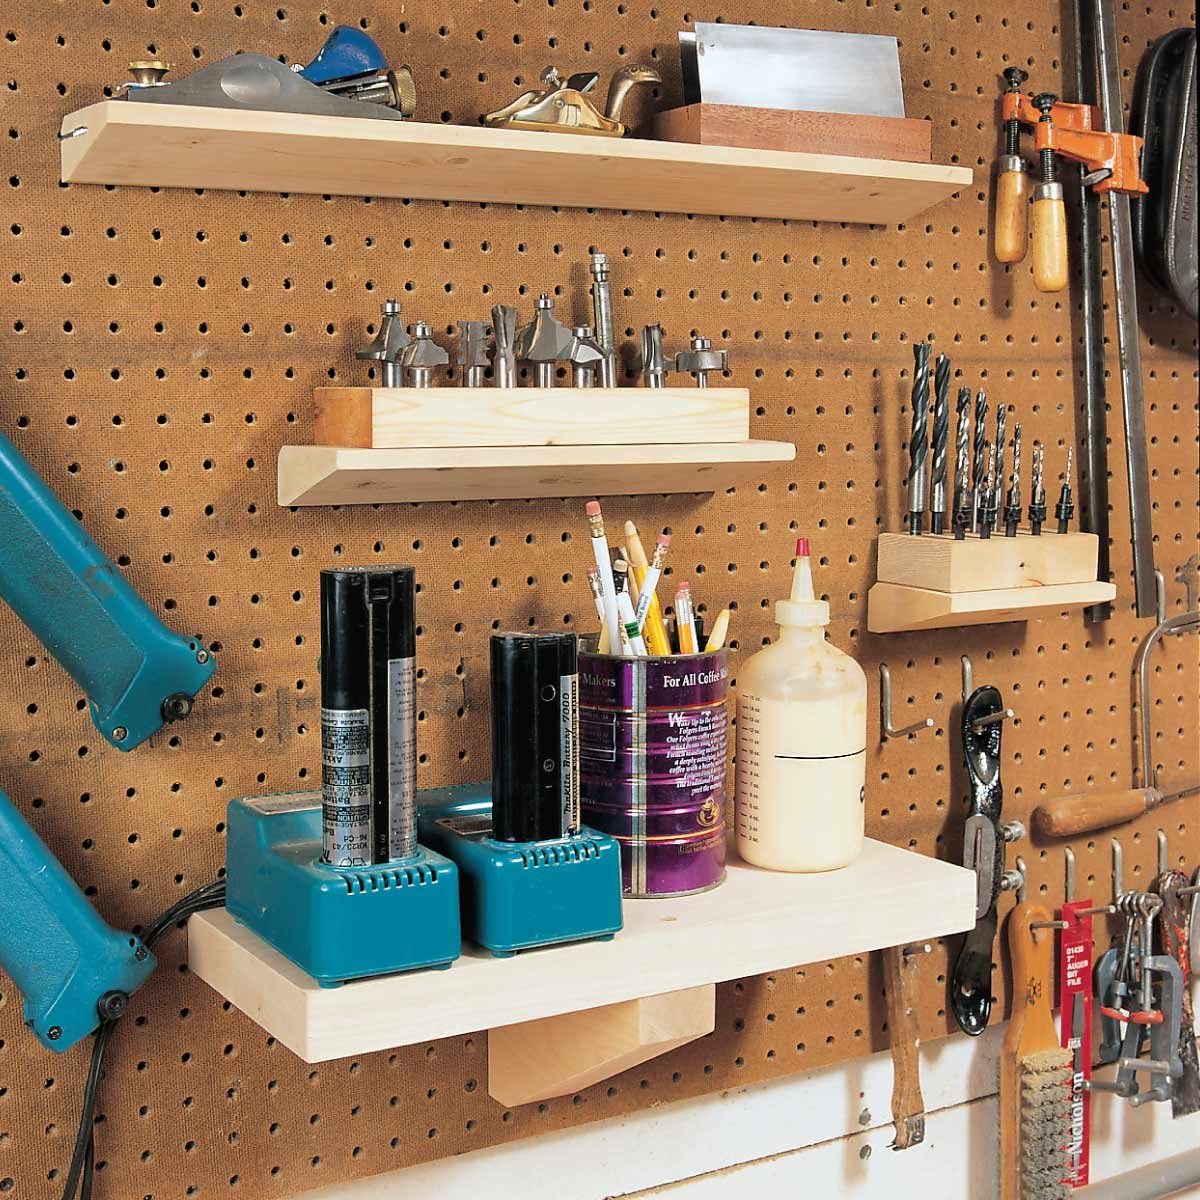 How to Organize Small Tools and Hardware - First Home Love Life